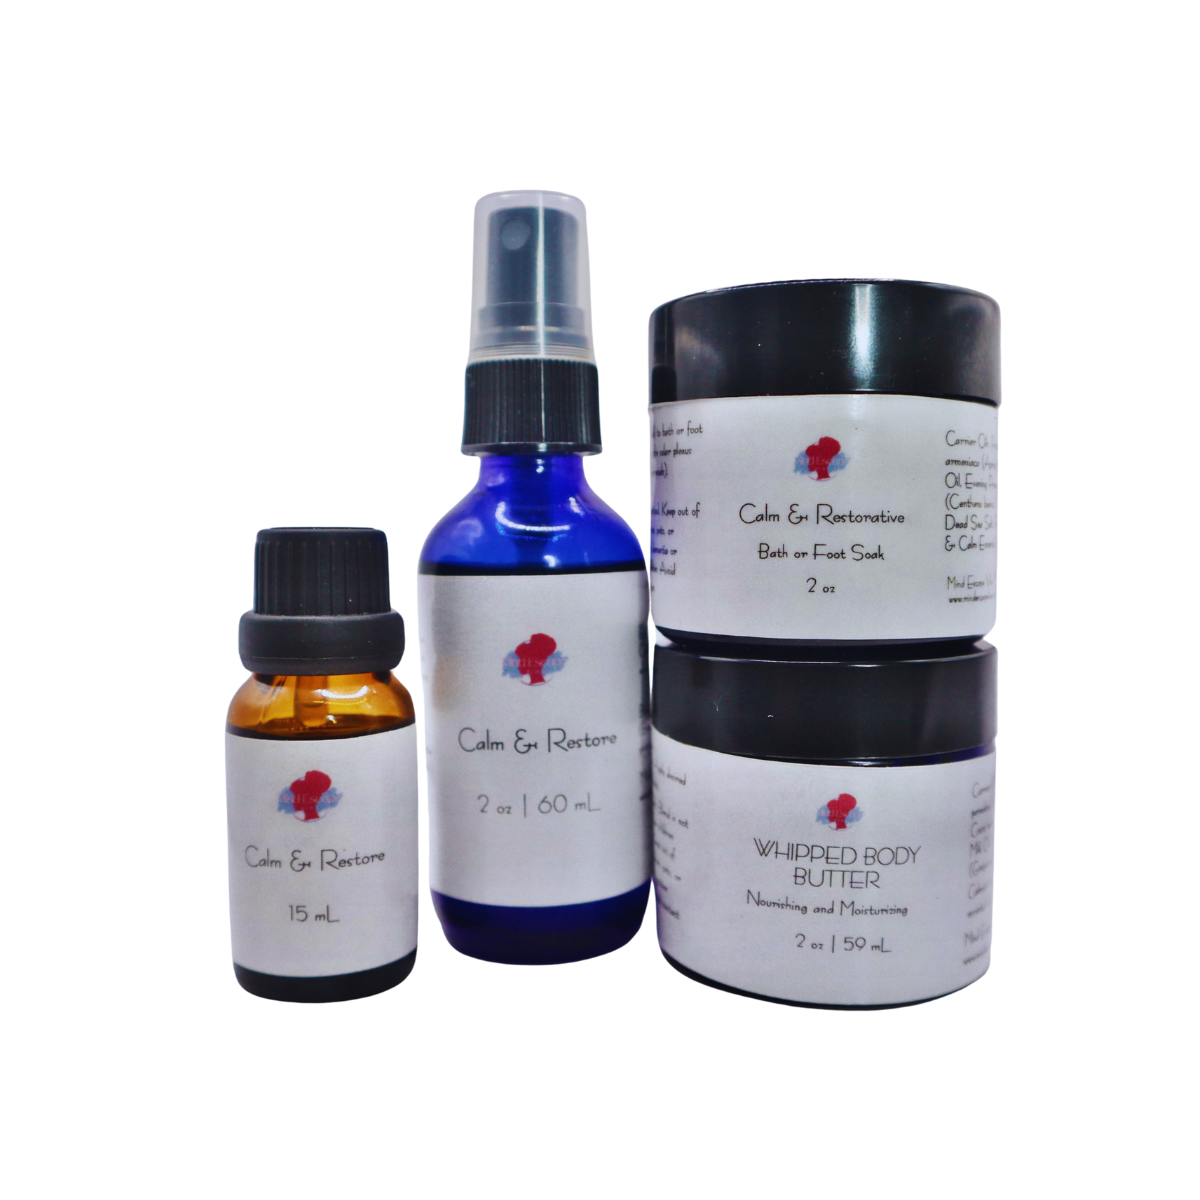 Calm & Restore Aromatherapy Collection